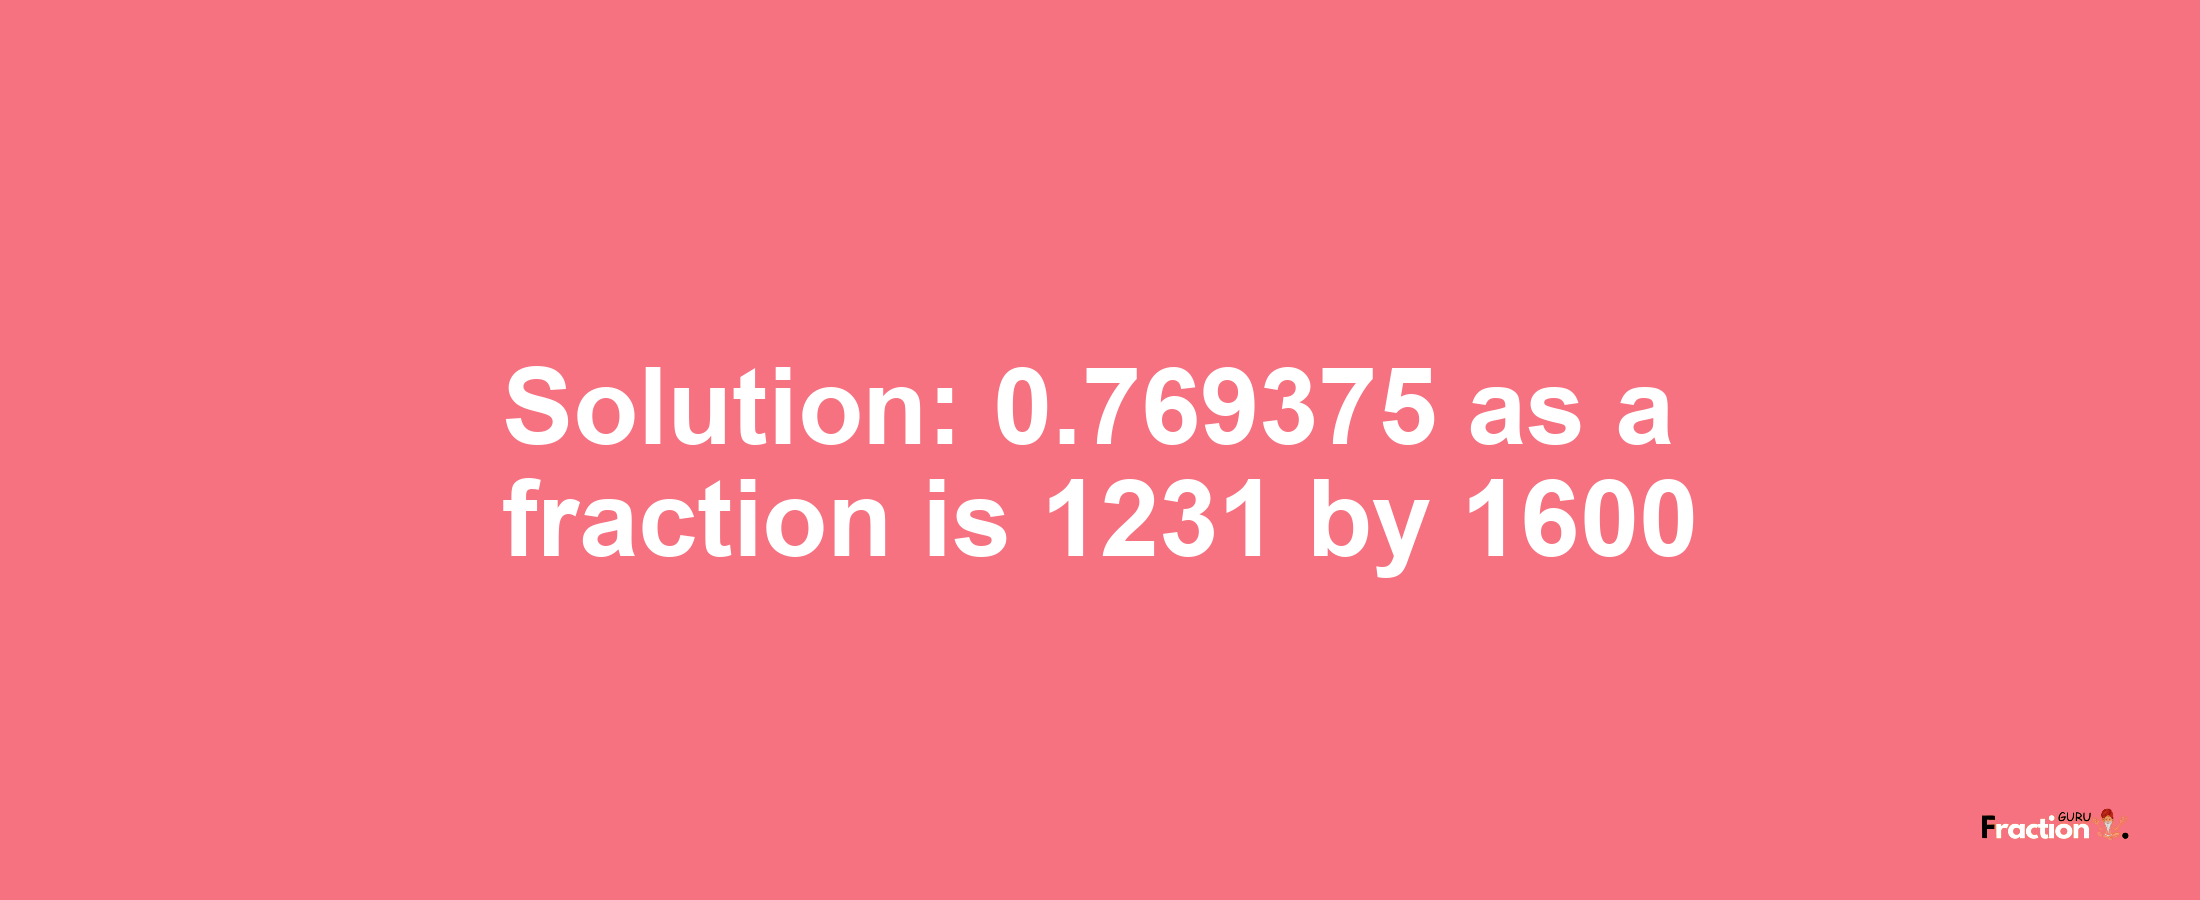 Solution:0.769375 as a fraction is 1231/1600